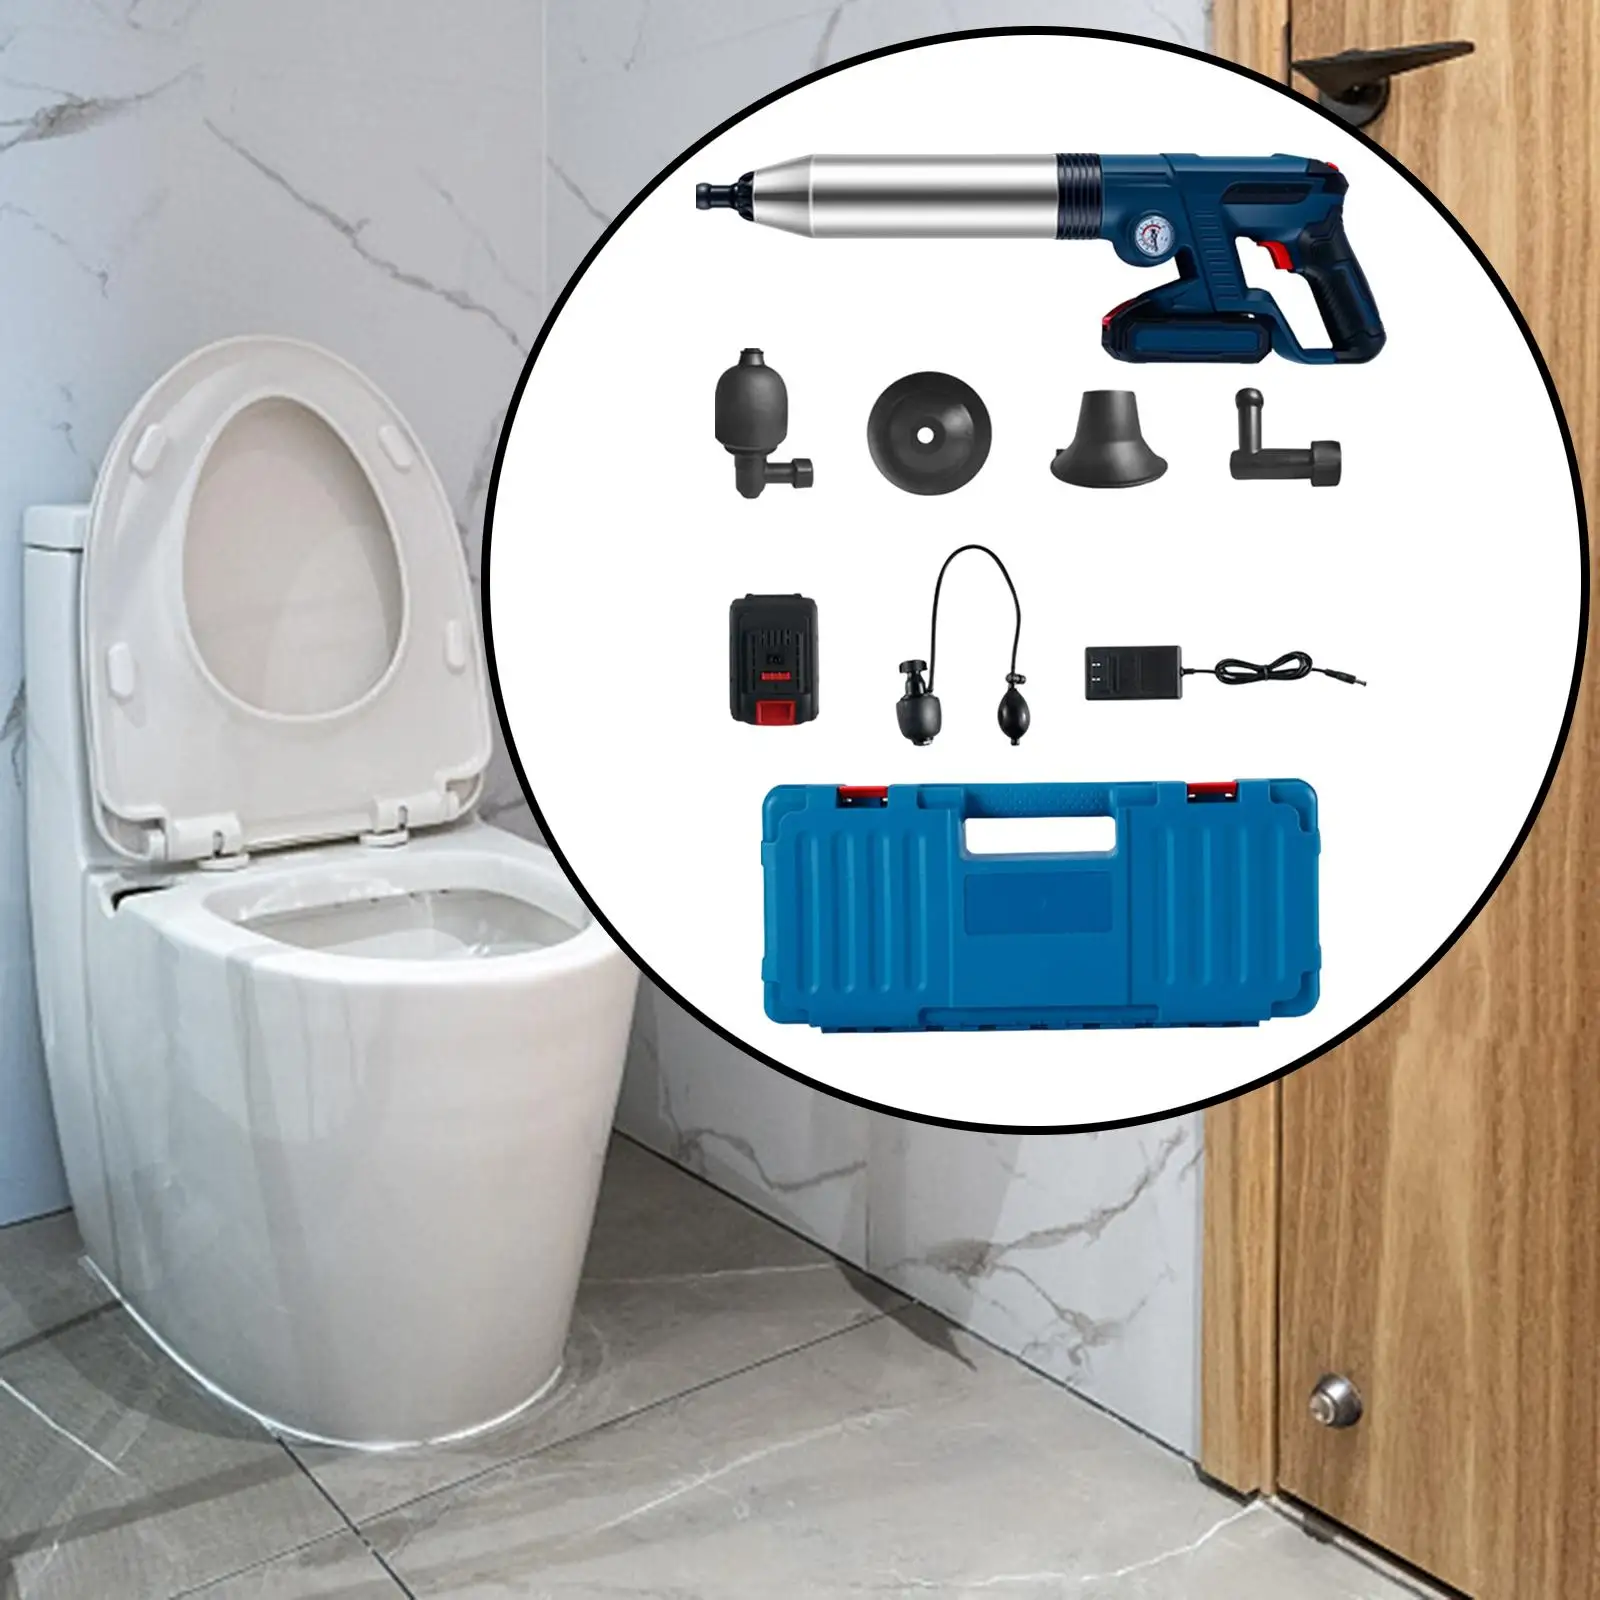 High Pressure Plunger Applied Plumbing Tools for Kitchen Sink Bathroom